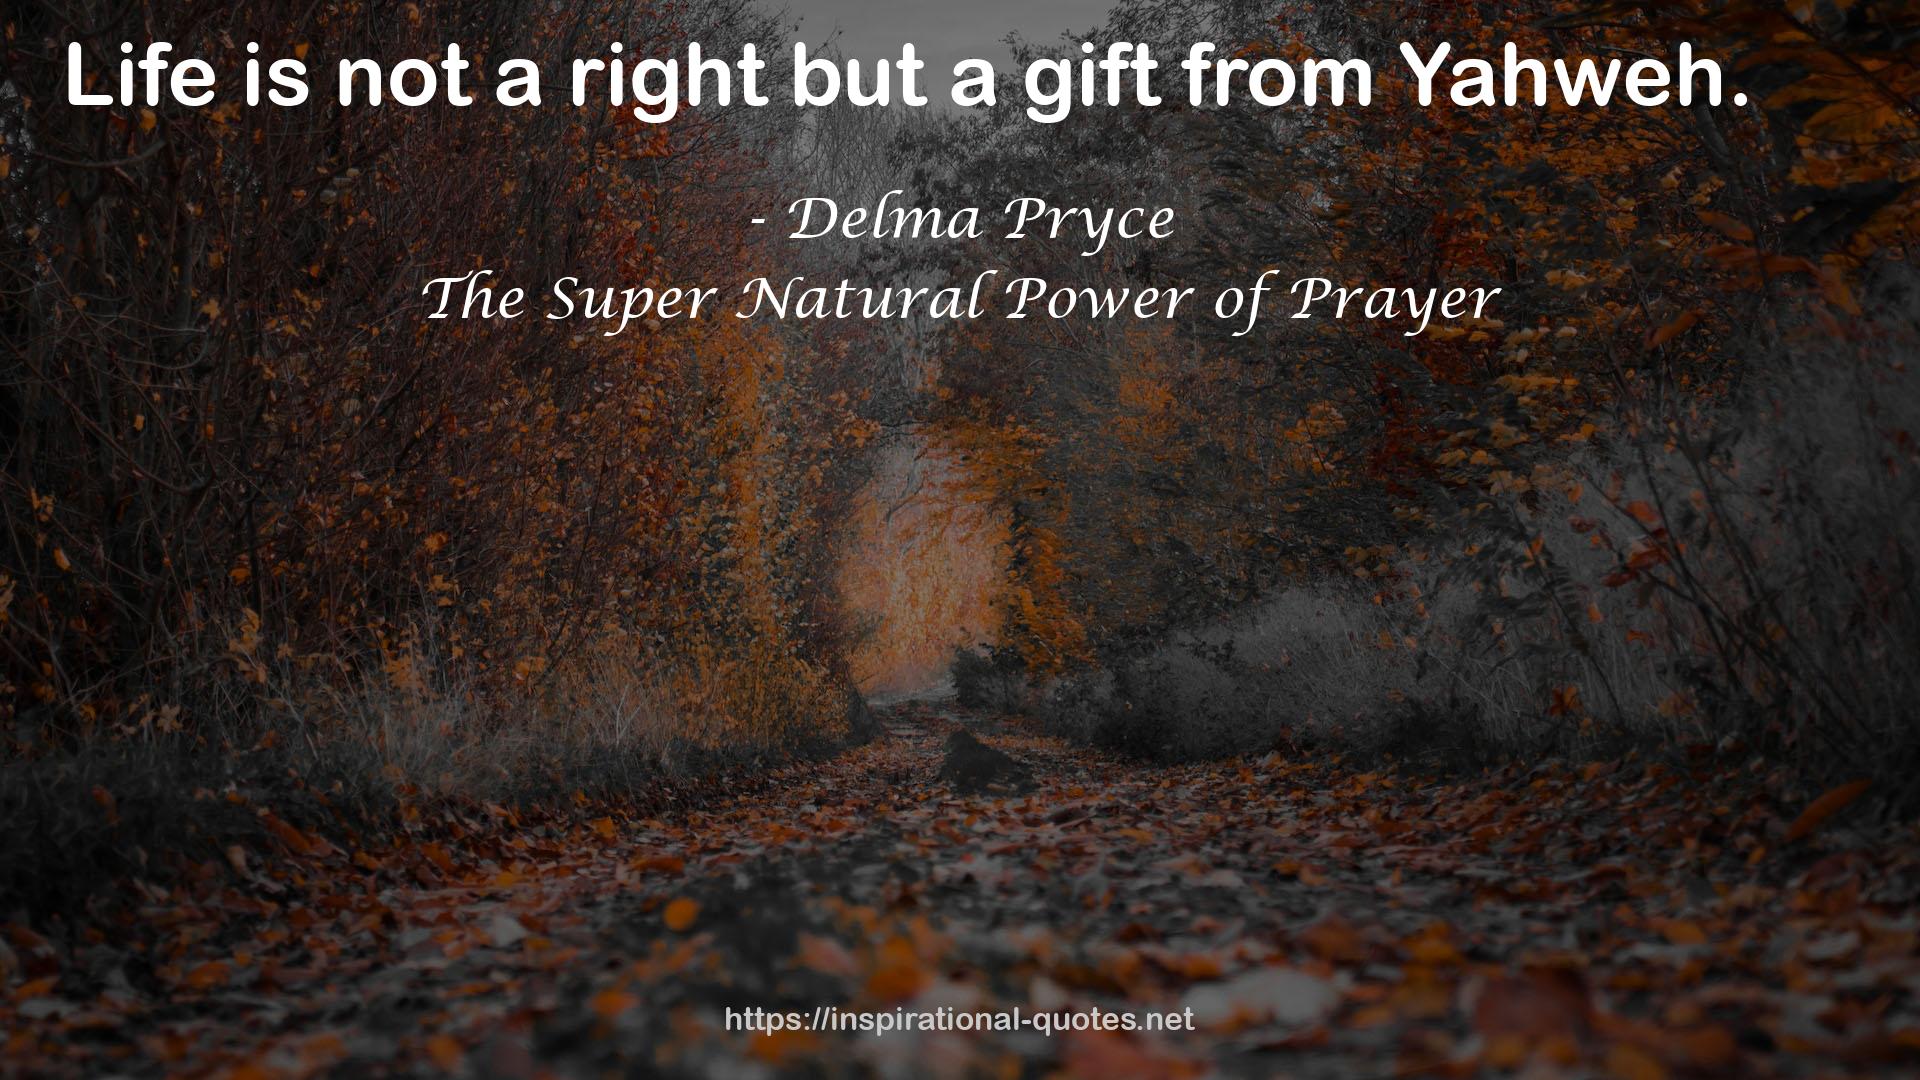 The Super Natural Power of Prayer QUOTES